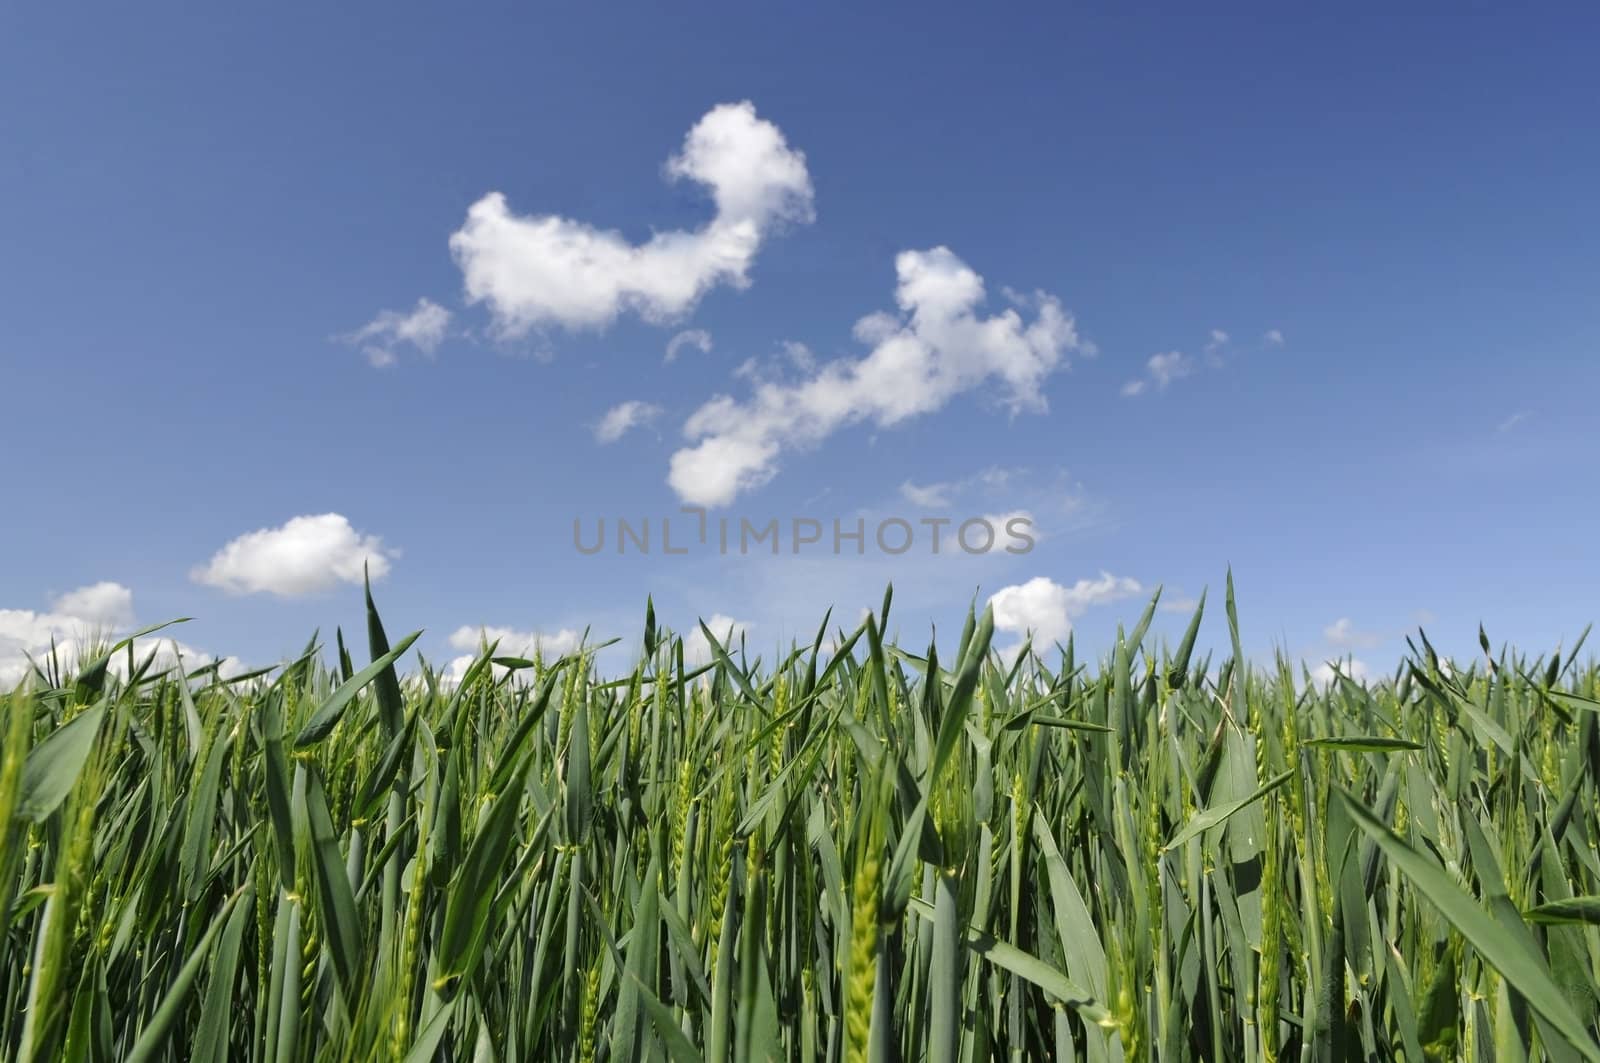 Field of Young Corn with a Blue Sky and some clouds